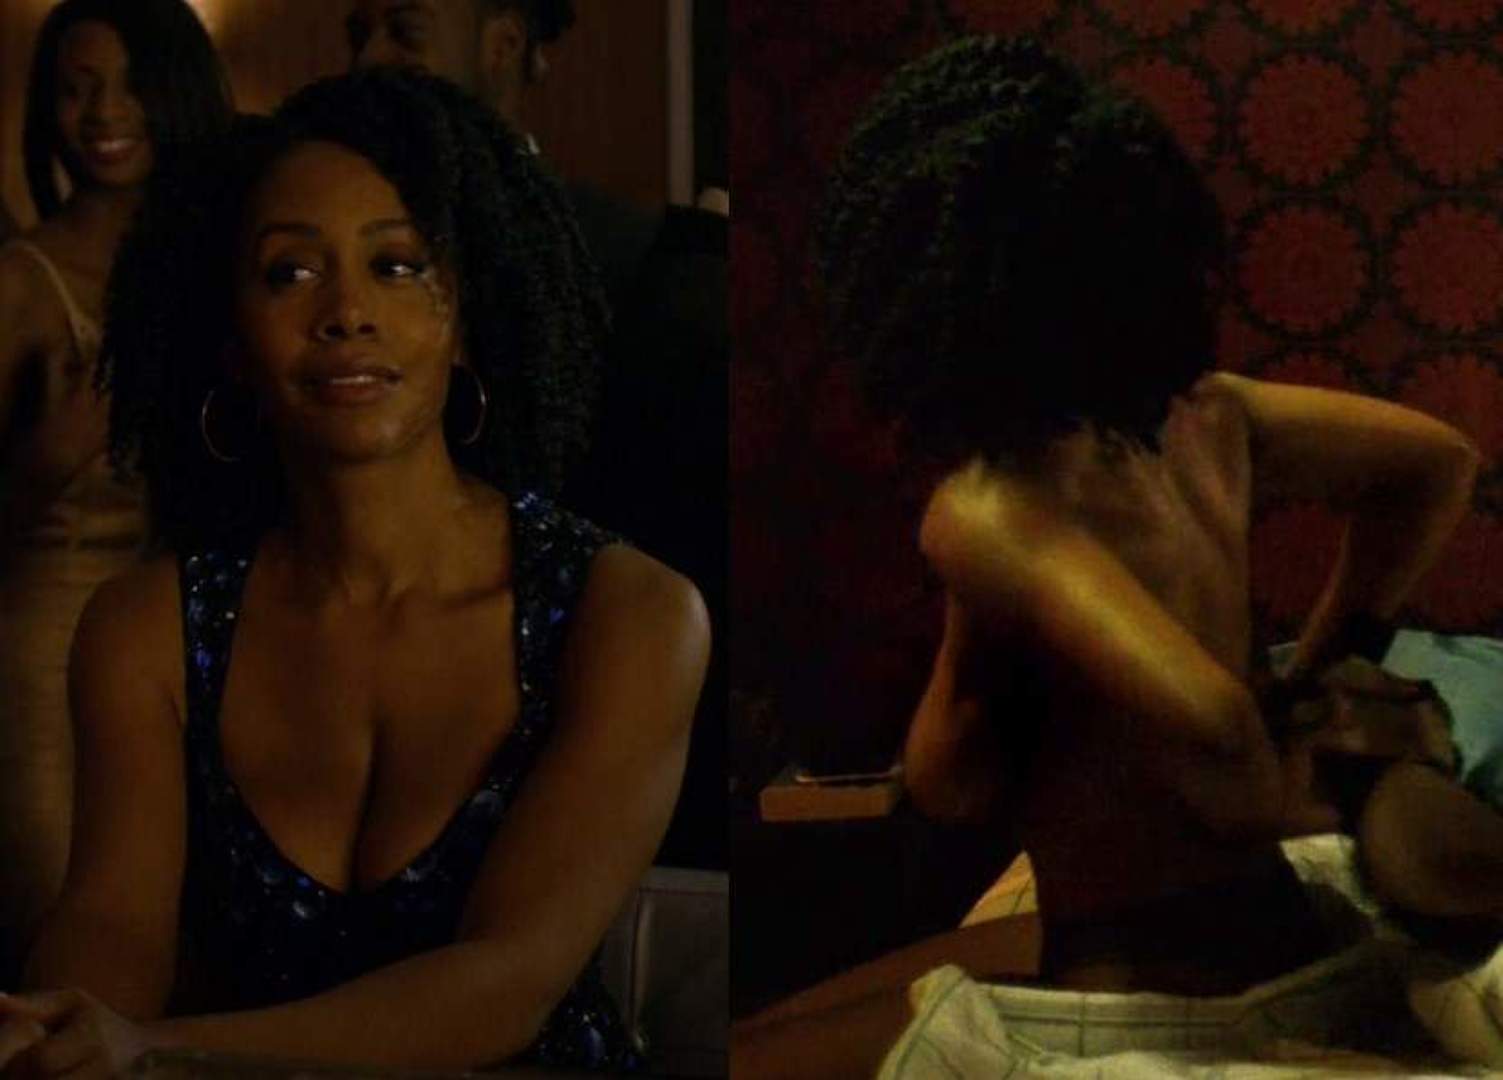 Simone missick boobs - 🧡 hot sexy photos of Simone Missick Reveal Her Hidd...